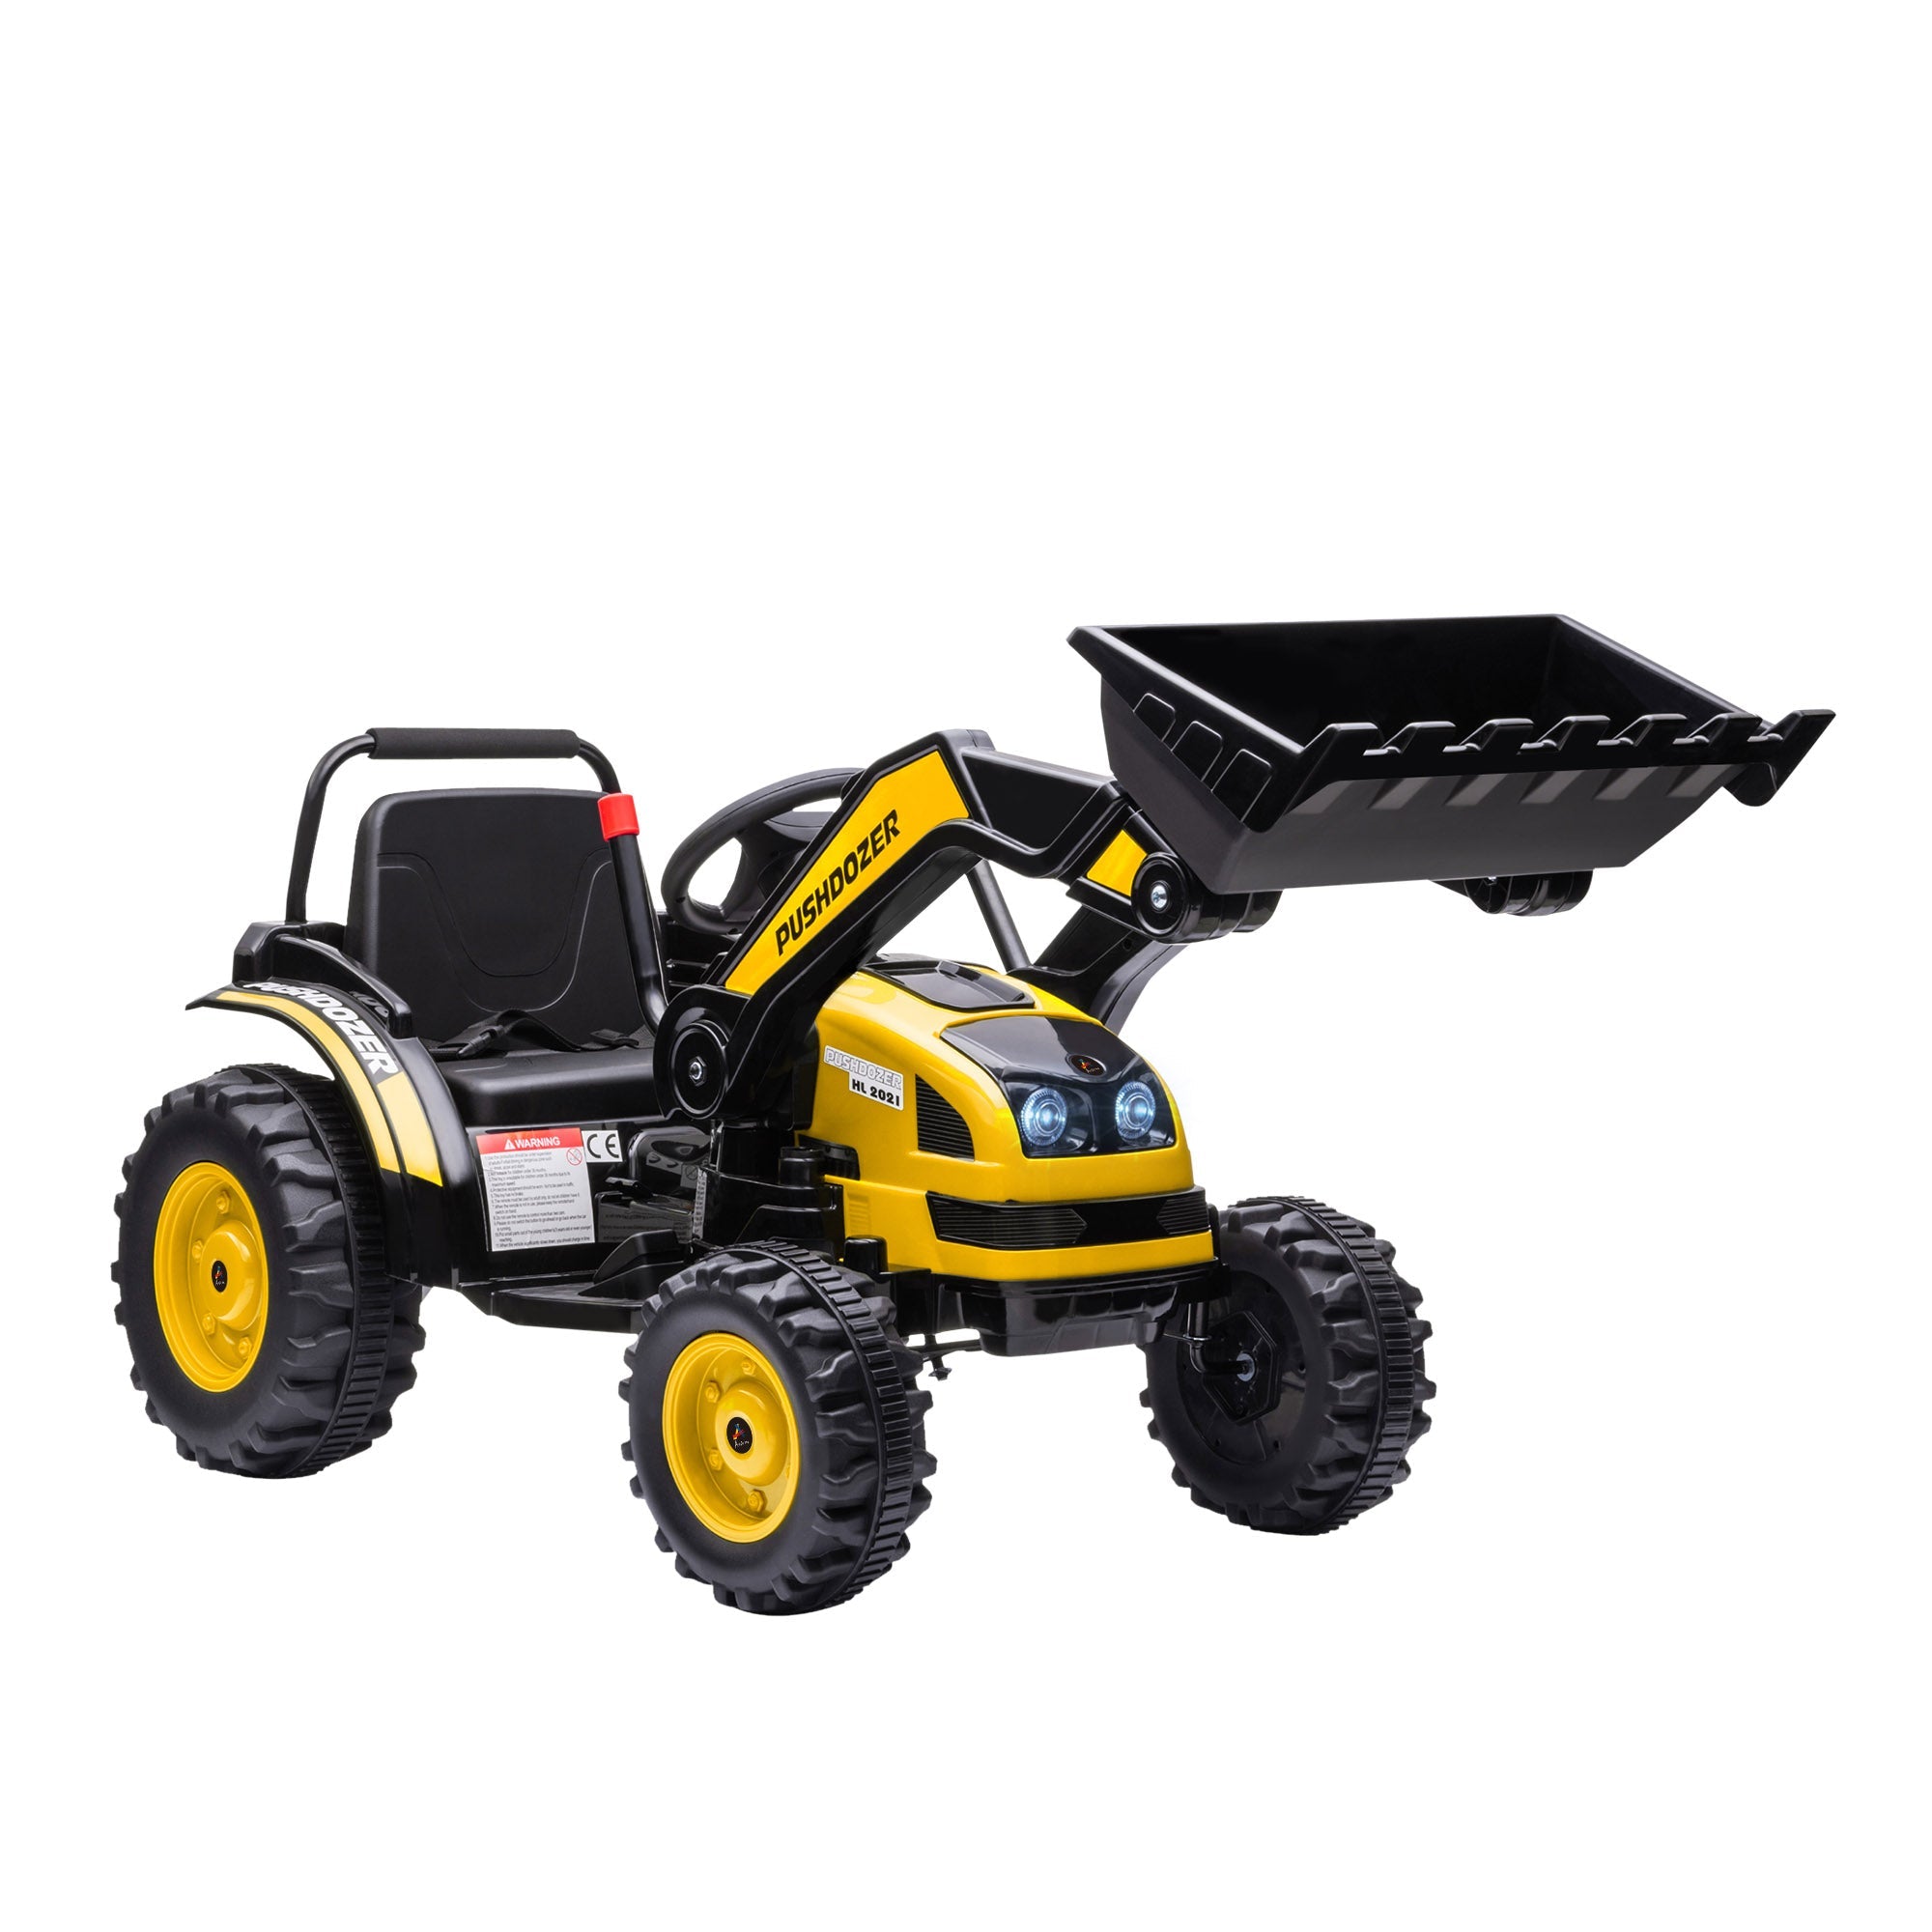 HOMCOM Kids Digger Ride On Excavator 6V Battery Powered Construction Tractor Music Headlight Moving Forward Backward Gear for 3-5 years old Yellow - TovaHaus